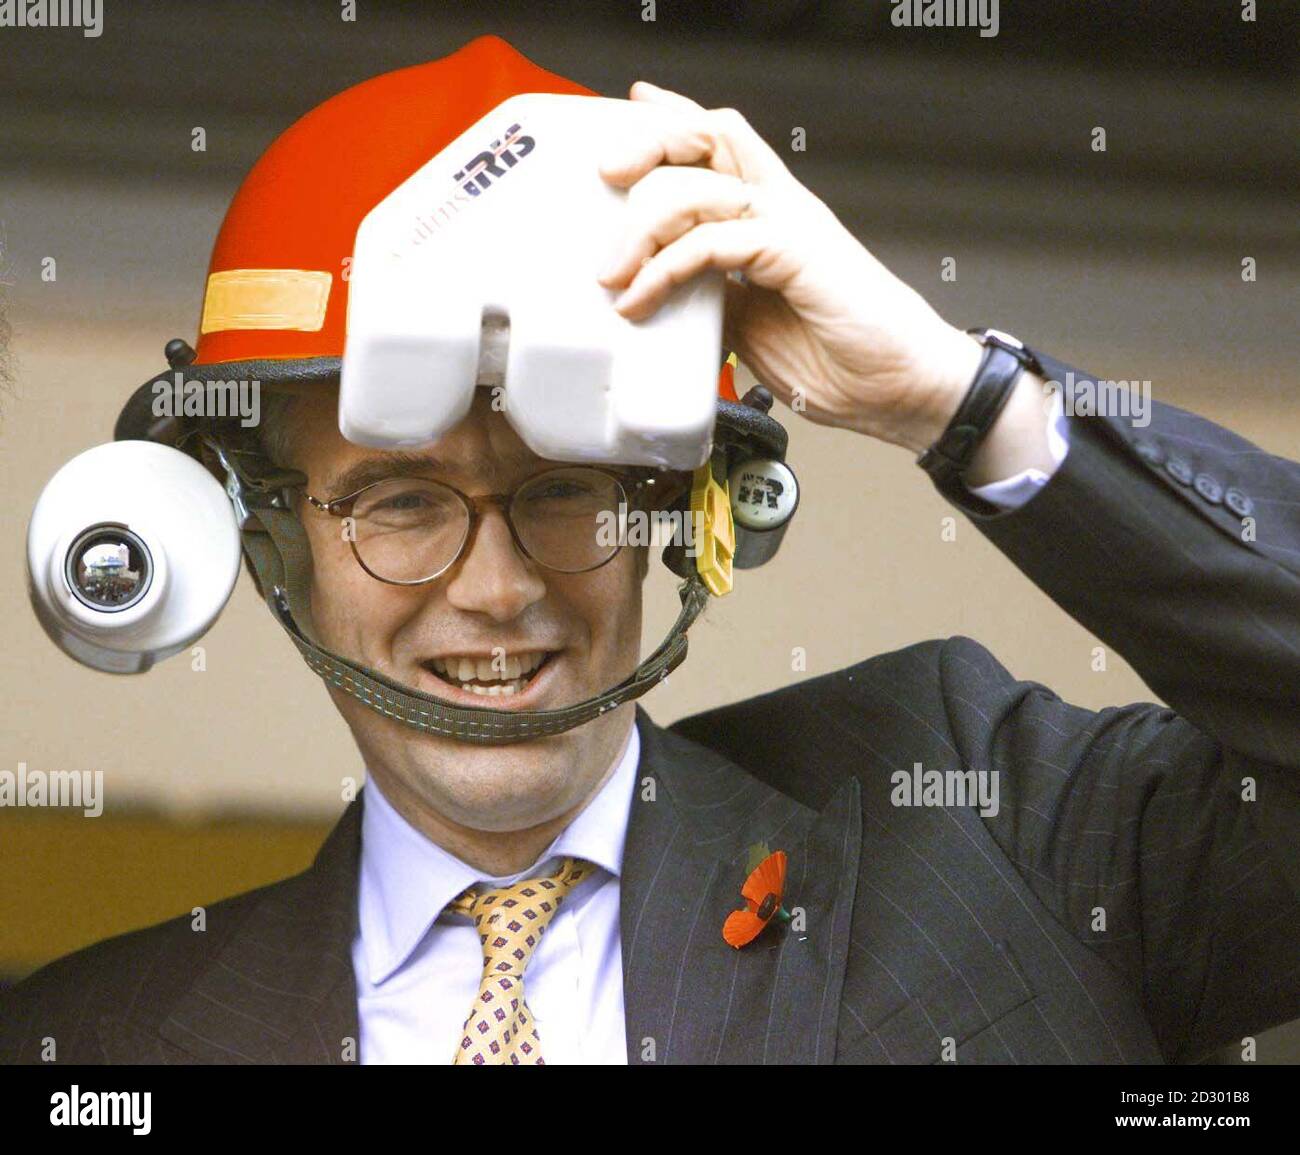 CBI Director General Adair Turner, trying on Thermal Imager during a photocall today (Sunday) at the start of the annual CBI Conference in Birmingham. Photo by DAVID JONES/PA *EDI* Stock Photo